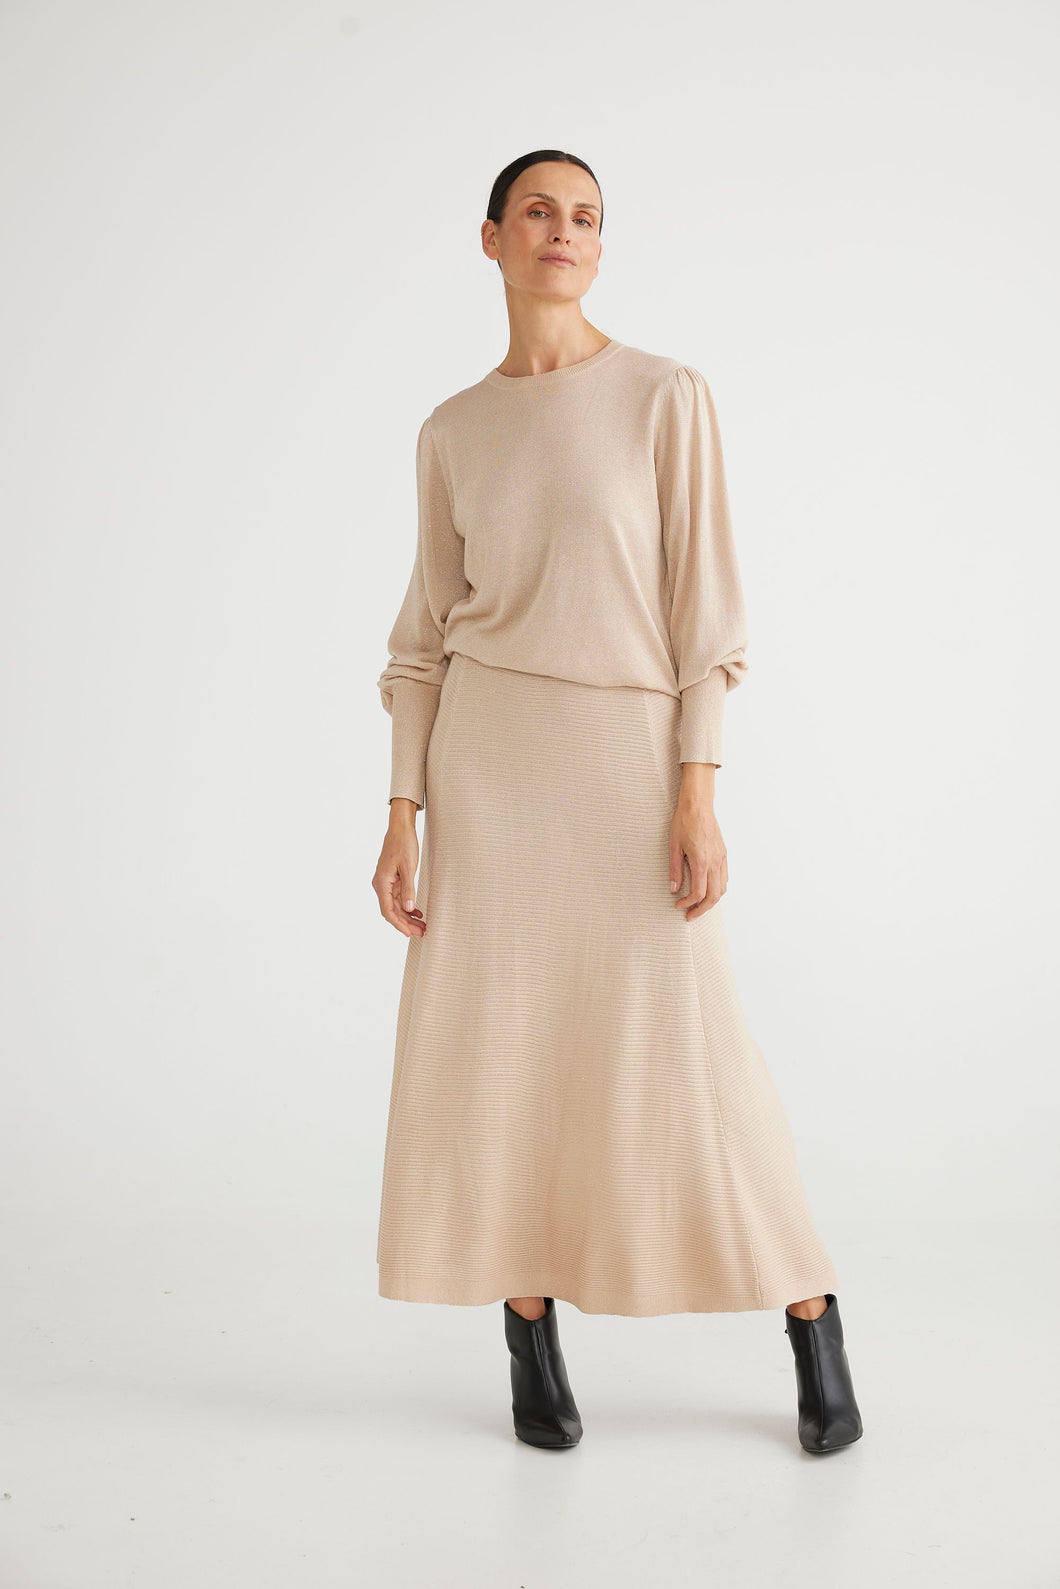 Alamo Knit Skirt in Light Bisque